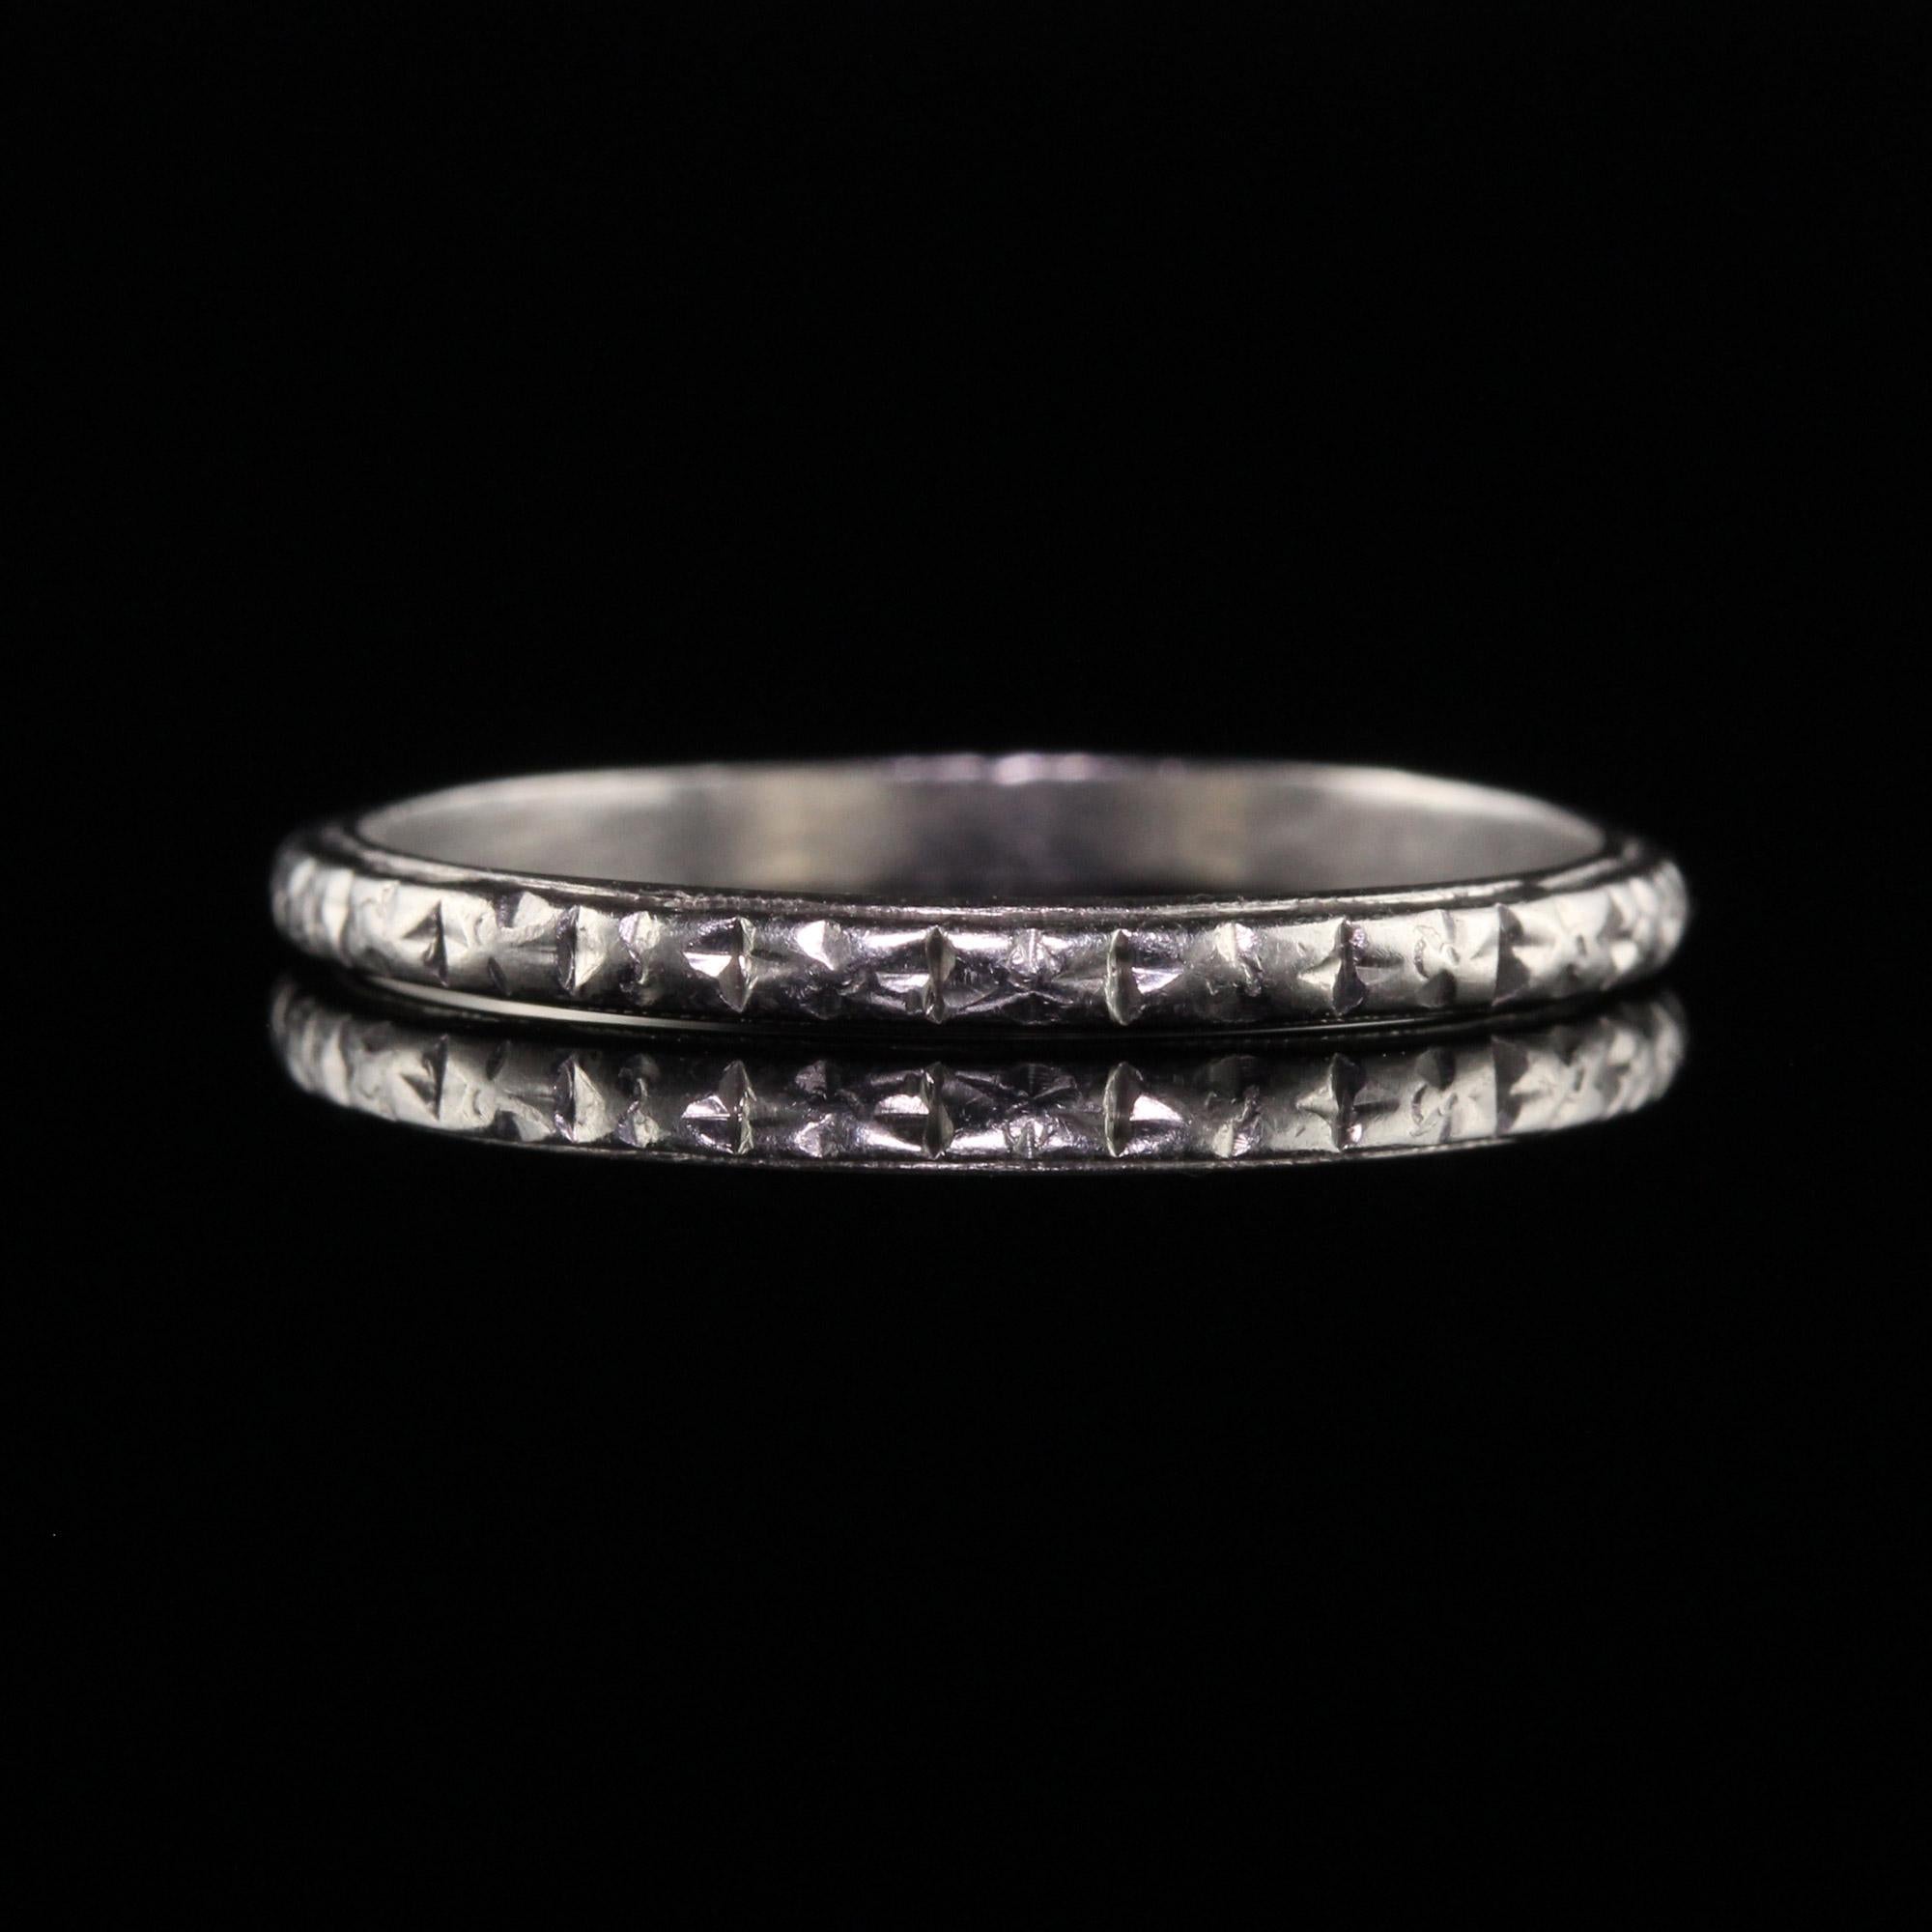 Antique Art Deco Platinum Engraved Wedding Band In Good Condition For Sale In Great Neck, NY